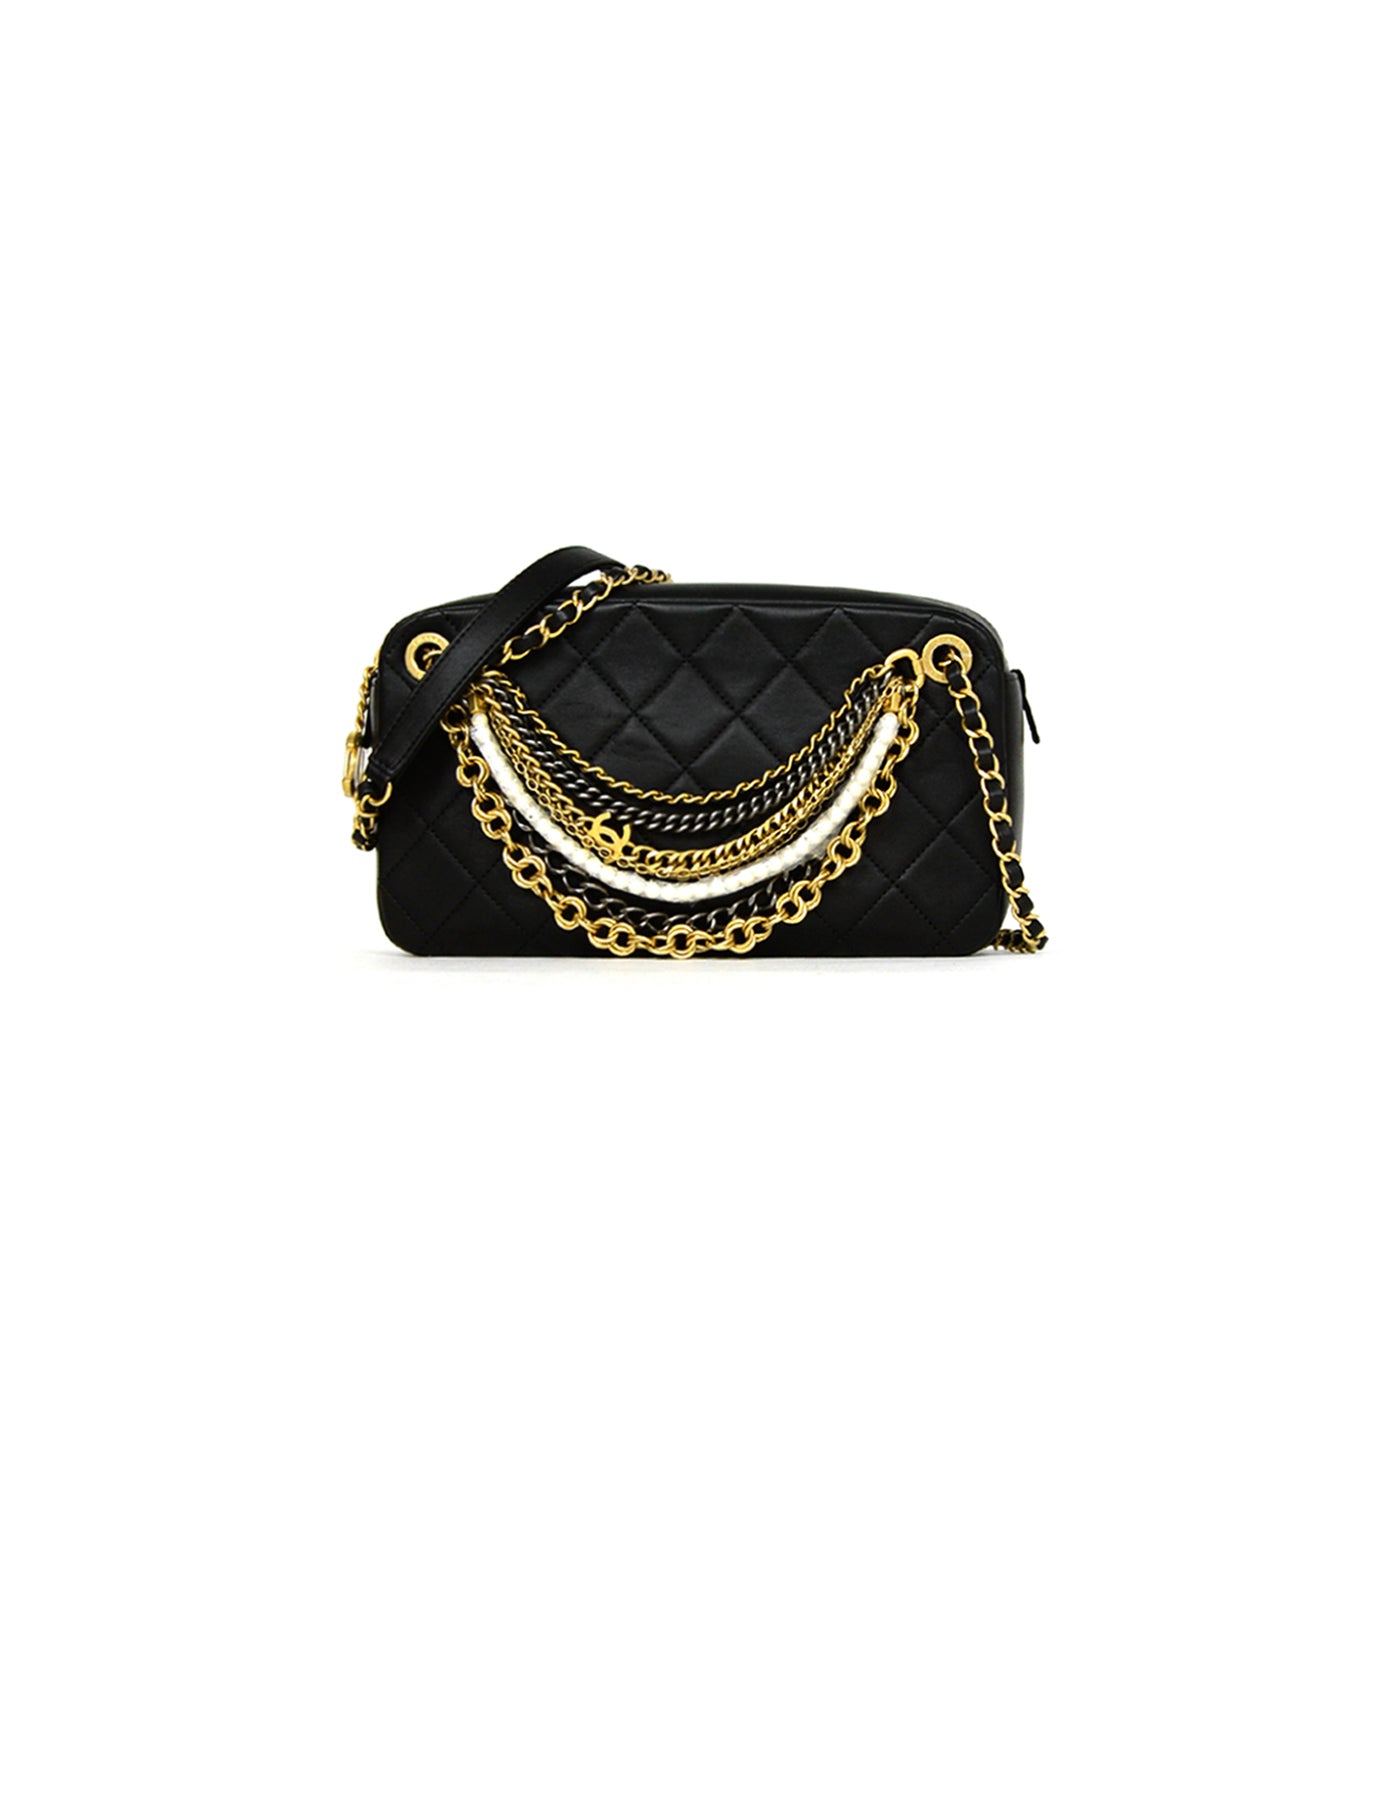 Chanel 2019 Black Leather Quilted All About Chains Camera Bag